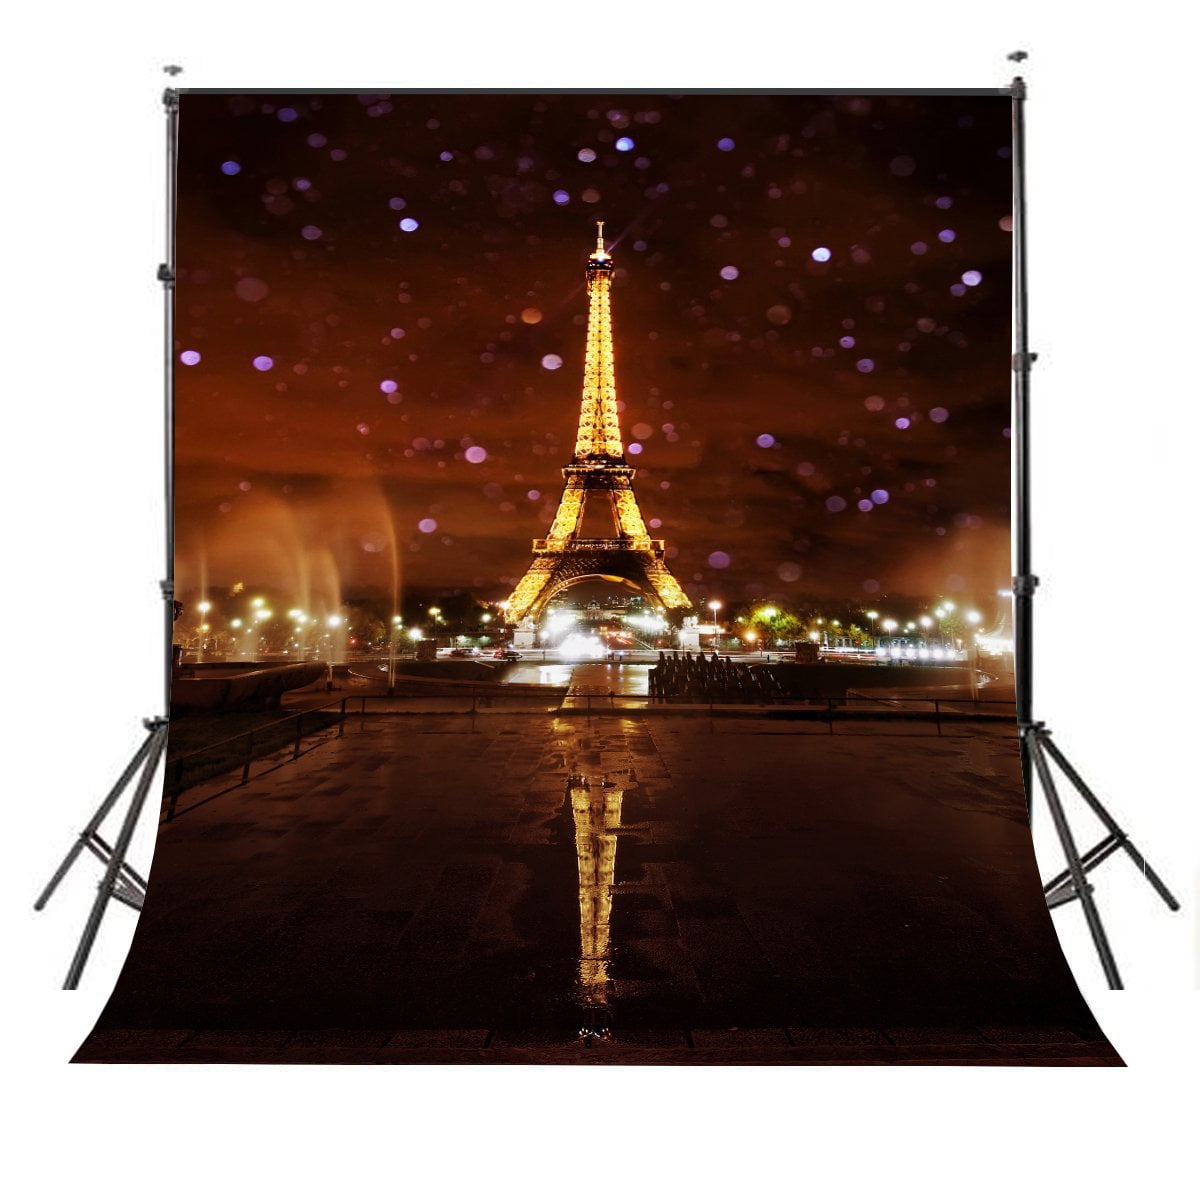 Perfectly PARIS Party Decoration EIFFEL TOWER Door Cover Mural Photo Booth Prop